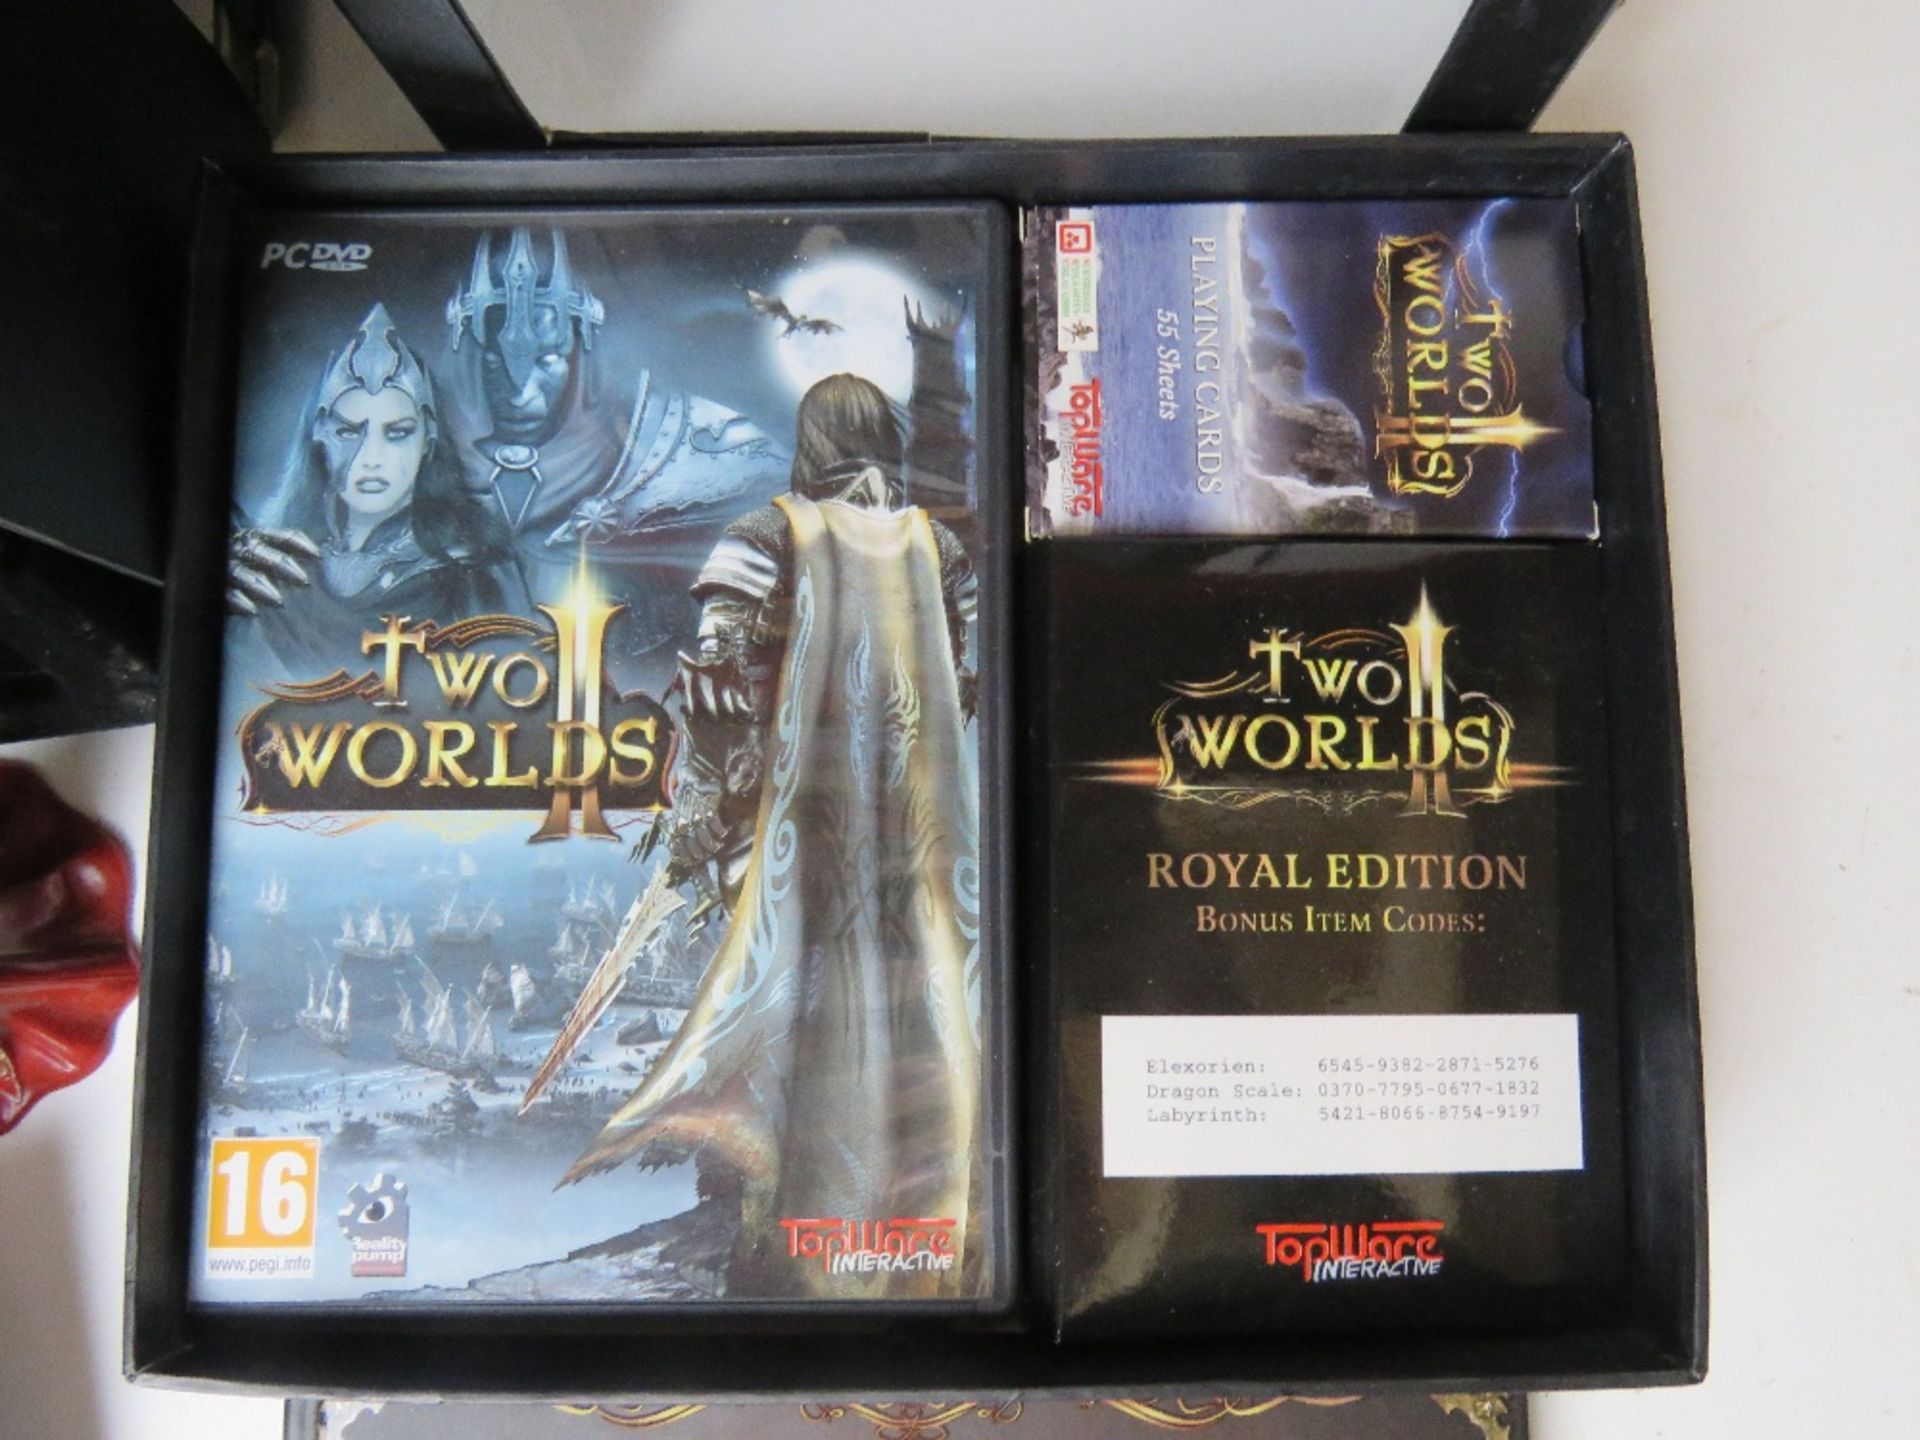 A Two Worlds II Topware Interactive game with artbook at figurine in 'Royal Edition' box. Box a/f. - Image 2 of 4